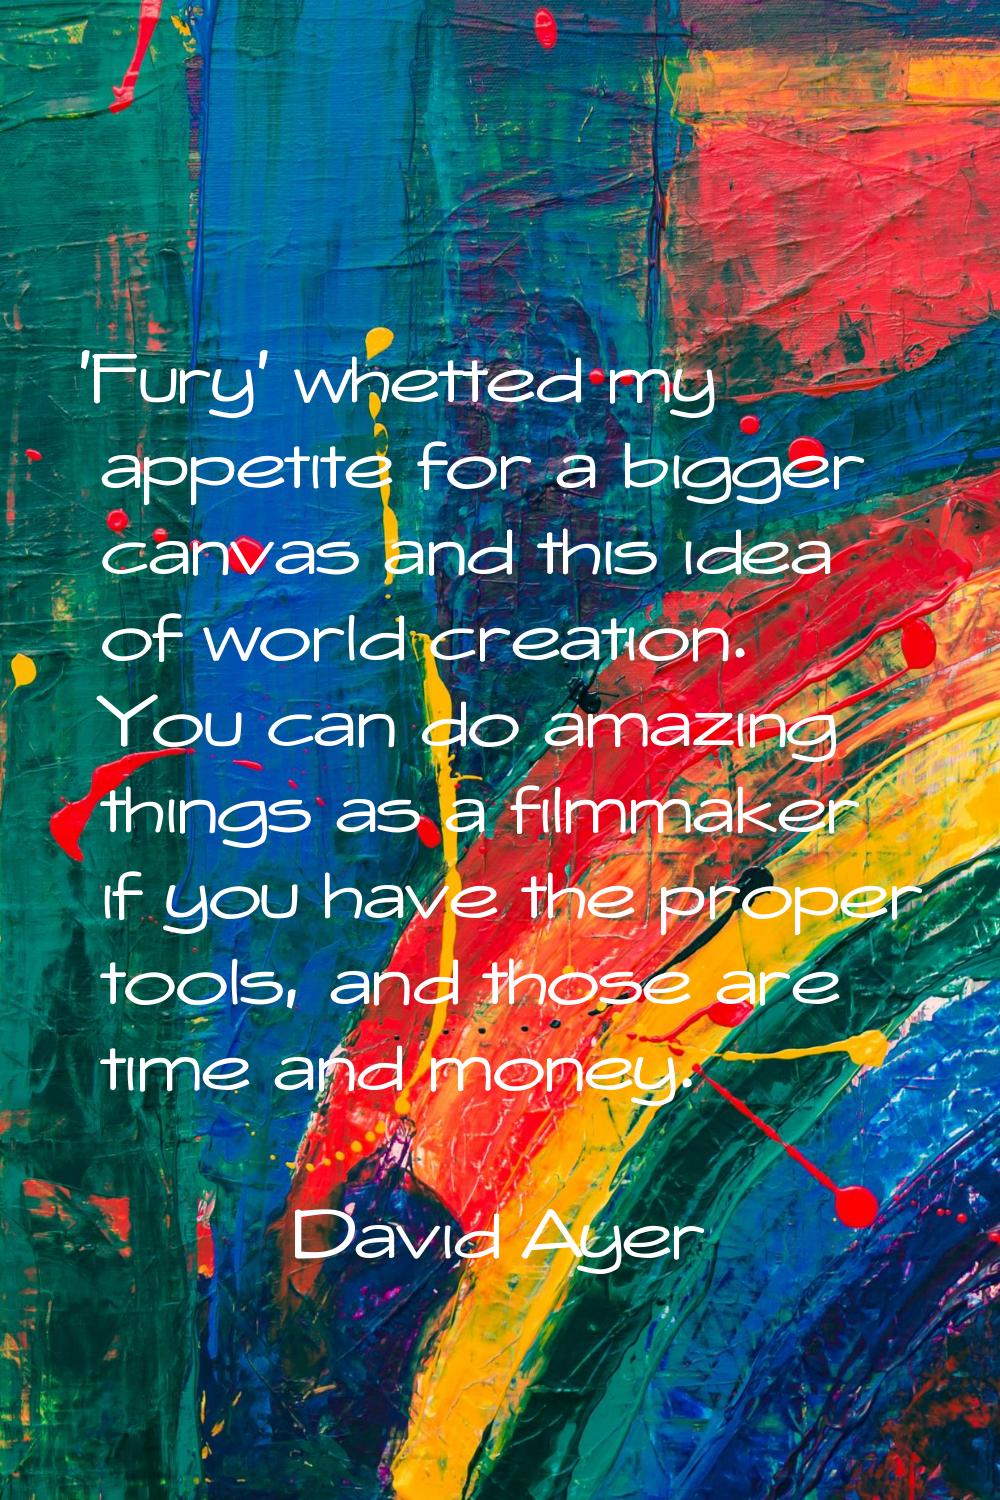 'Fury' whetted my appetite for a bigger canvas and this idea of world creation. You can do amazing 